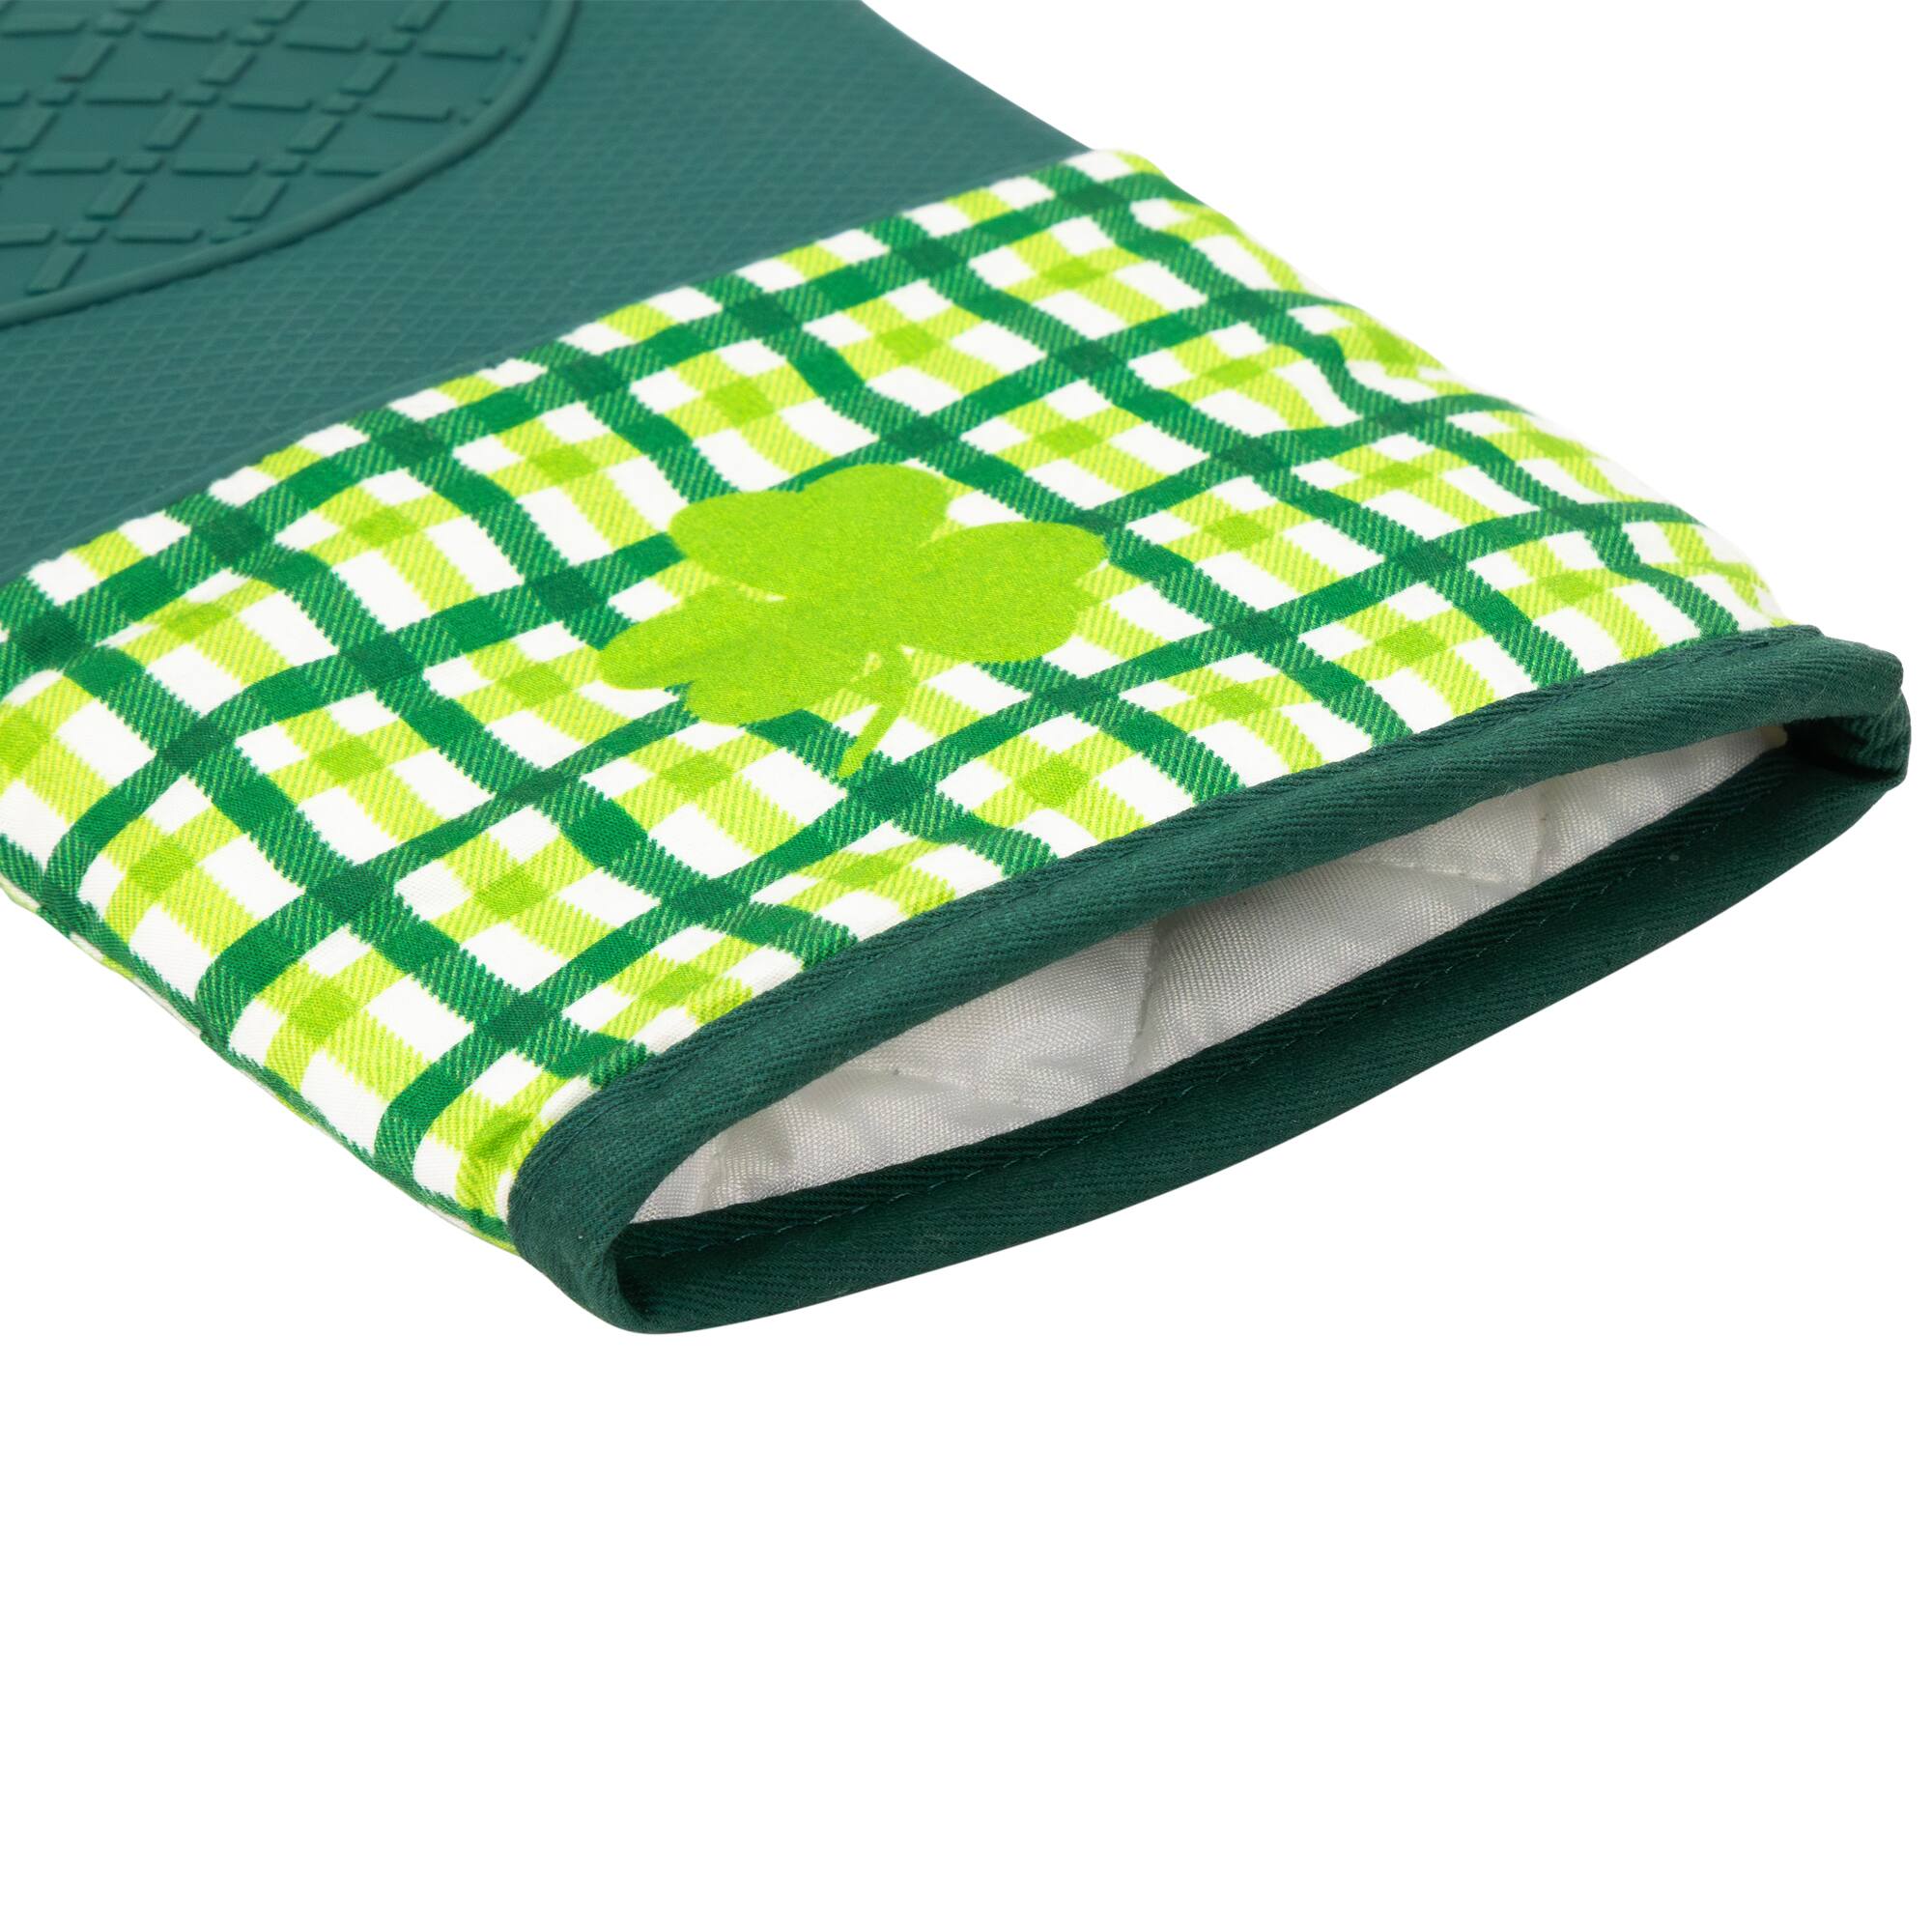 Green Plaid Shamrock Oven Mitts, 2ct.